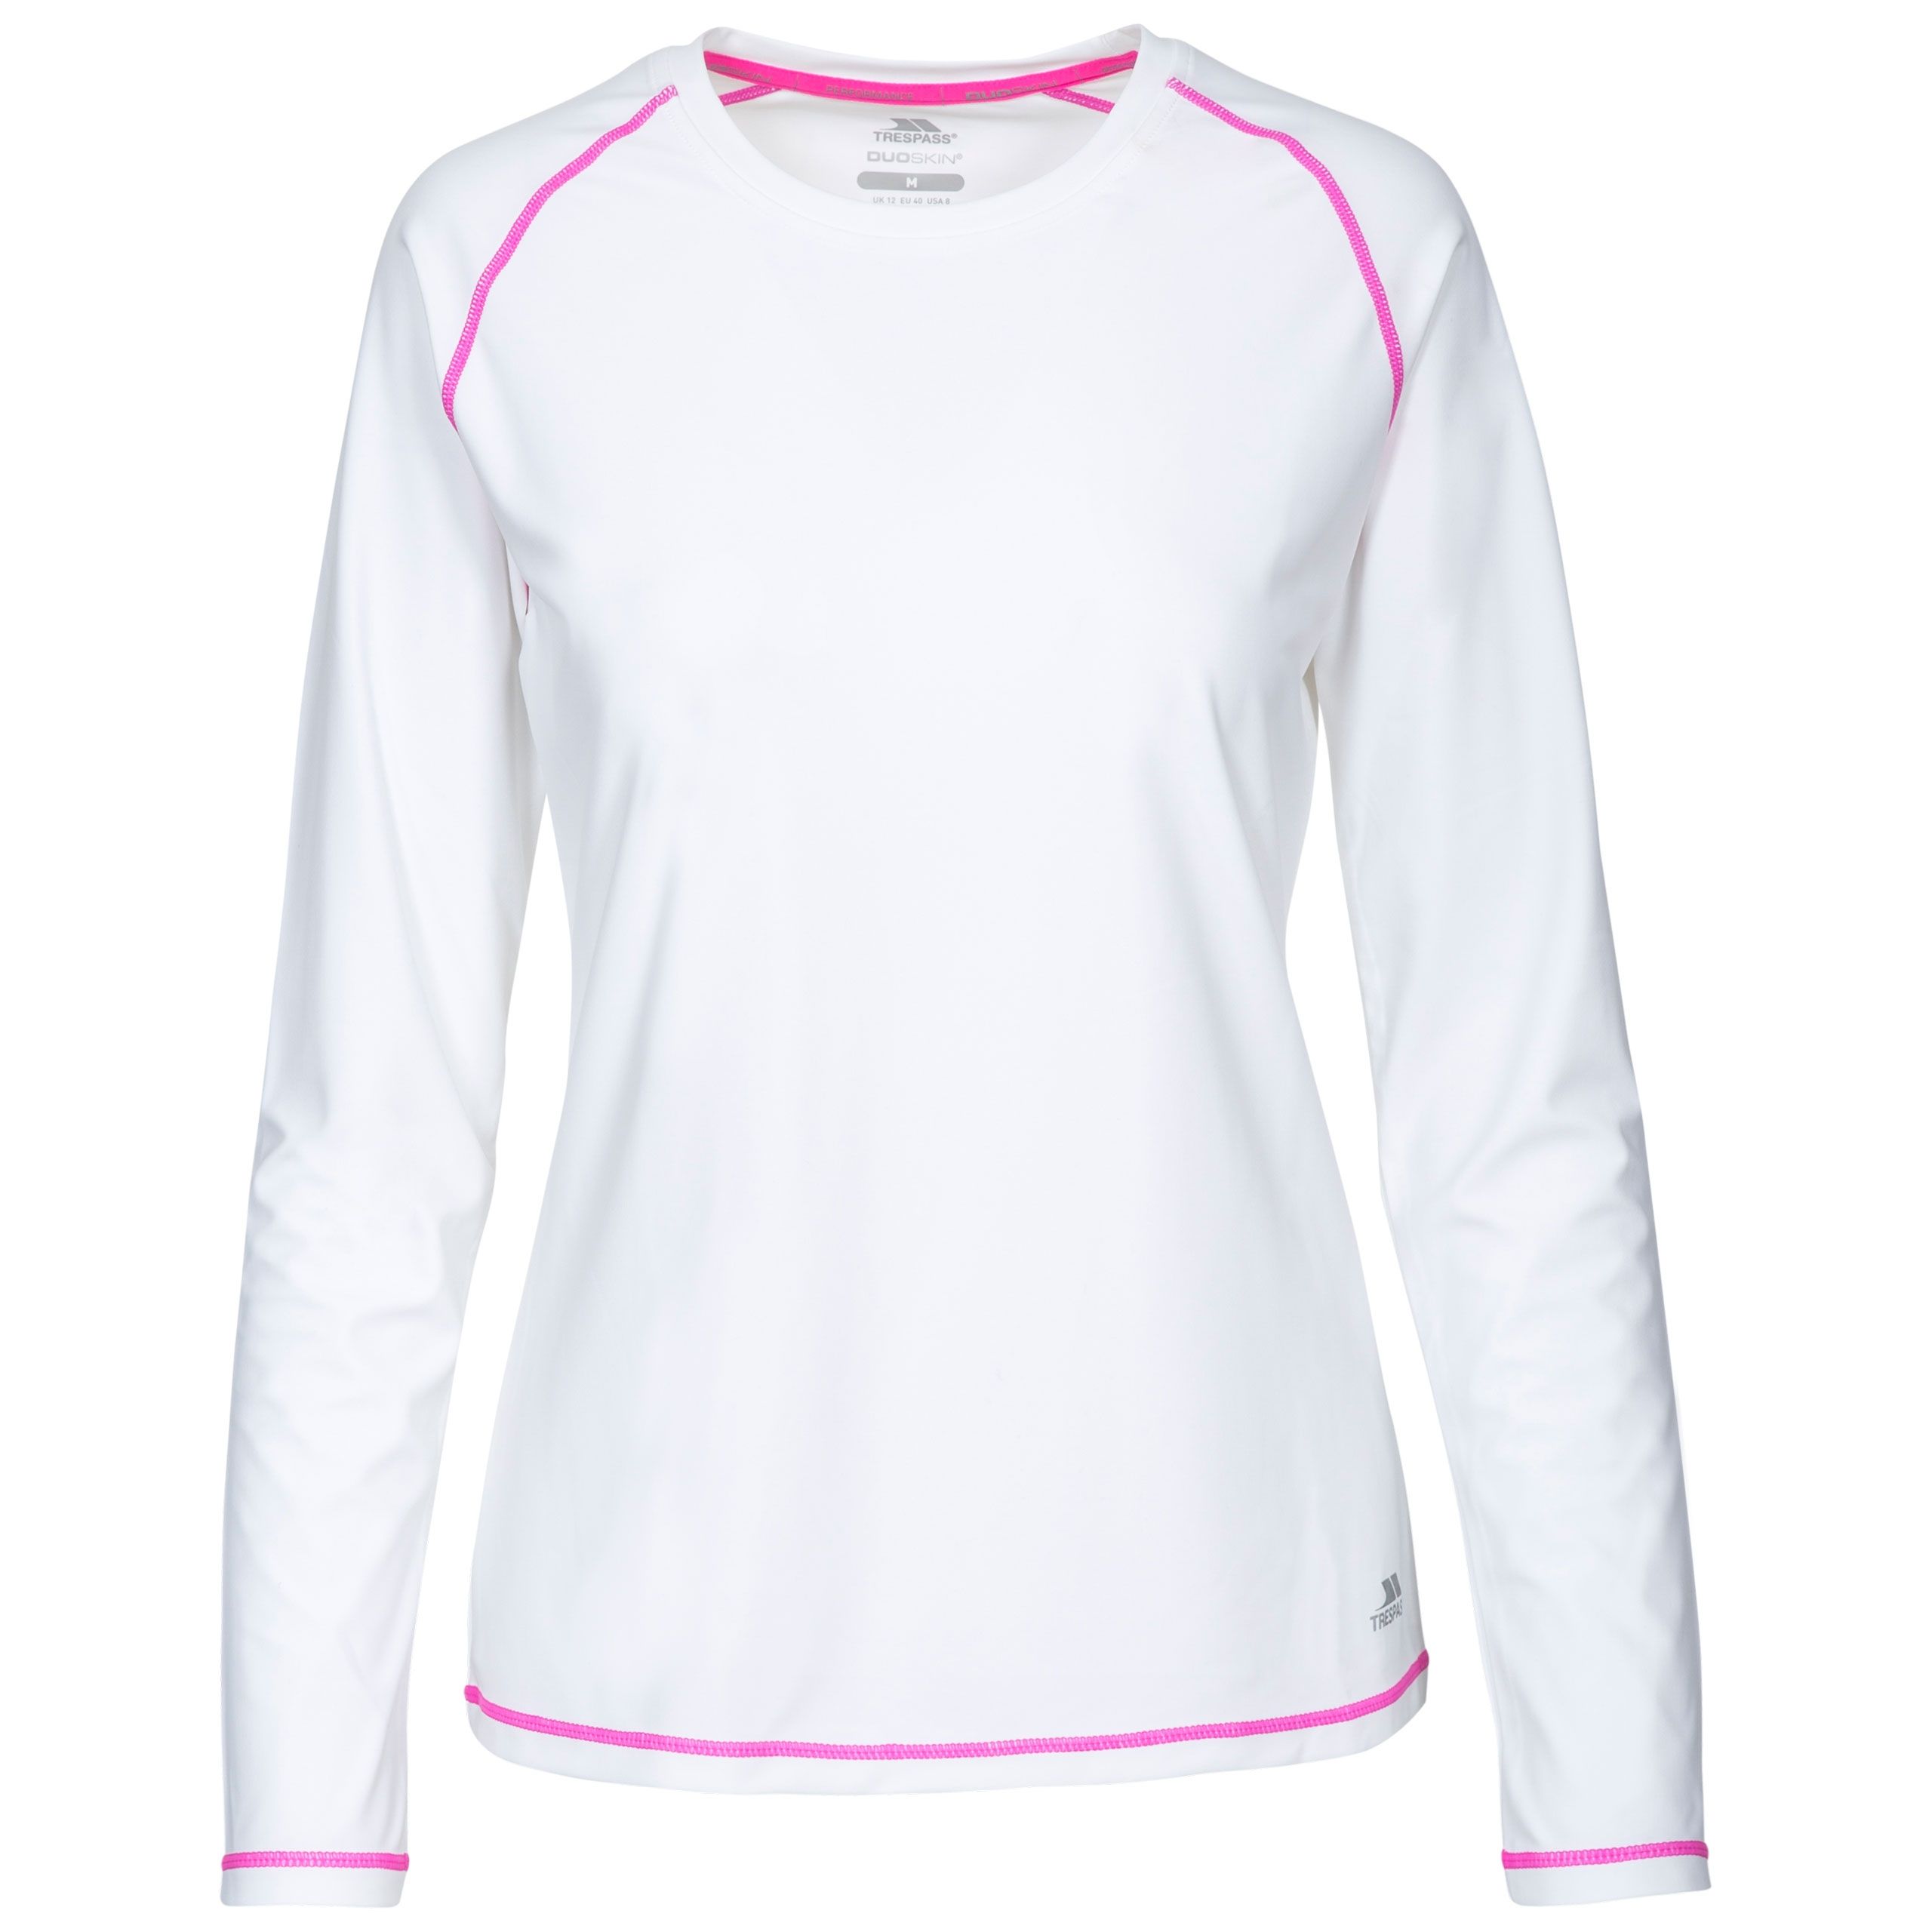 Hasting Womens Quick Dry Long Sleeve T-shirt